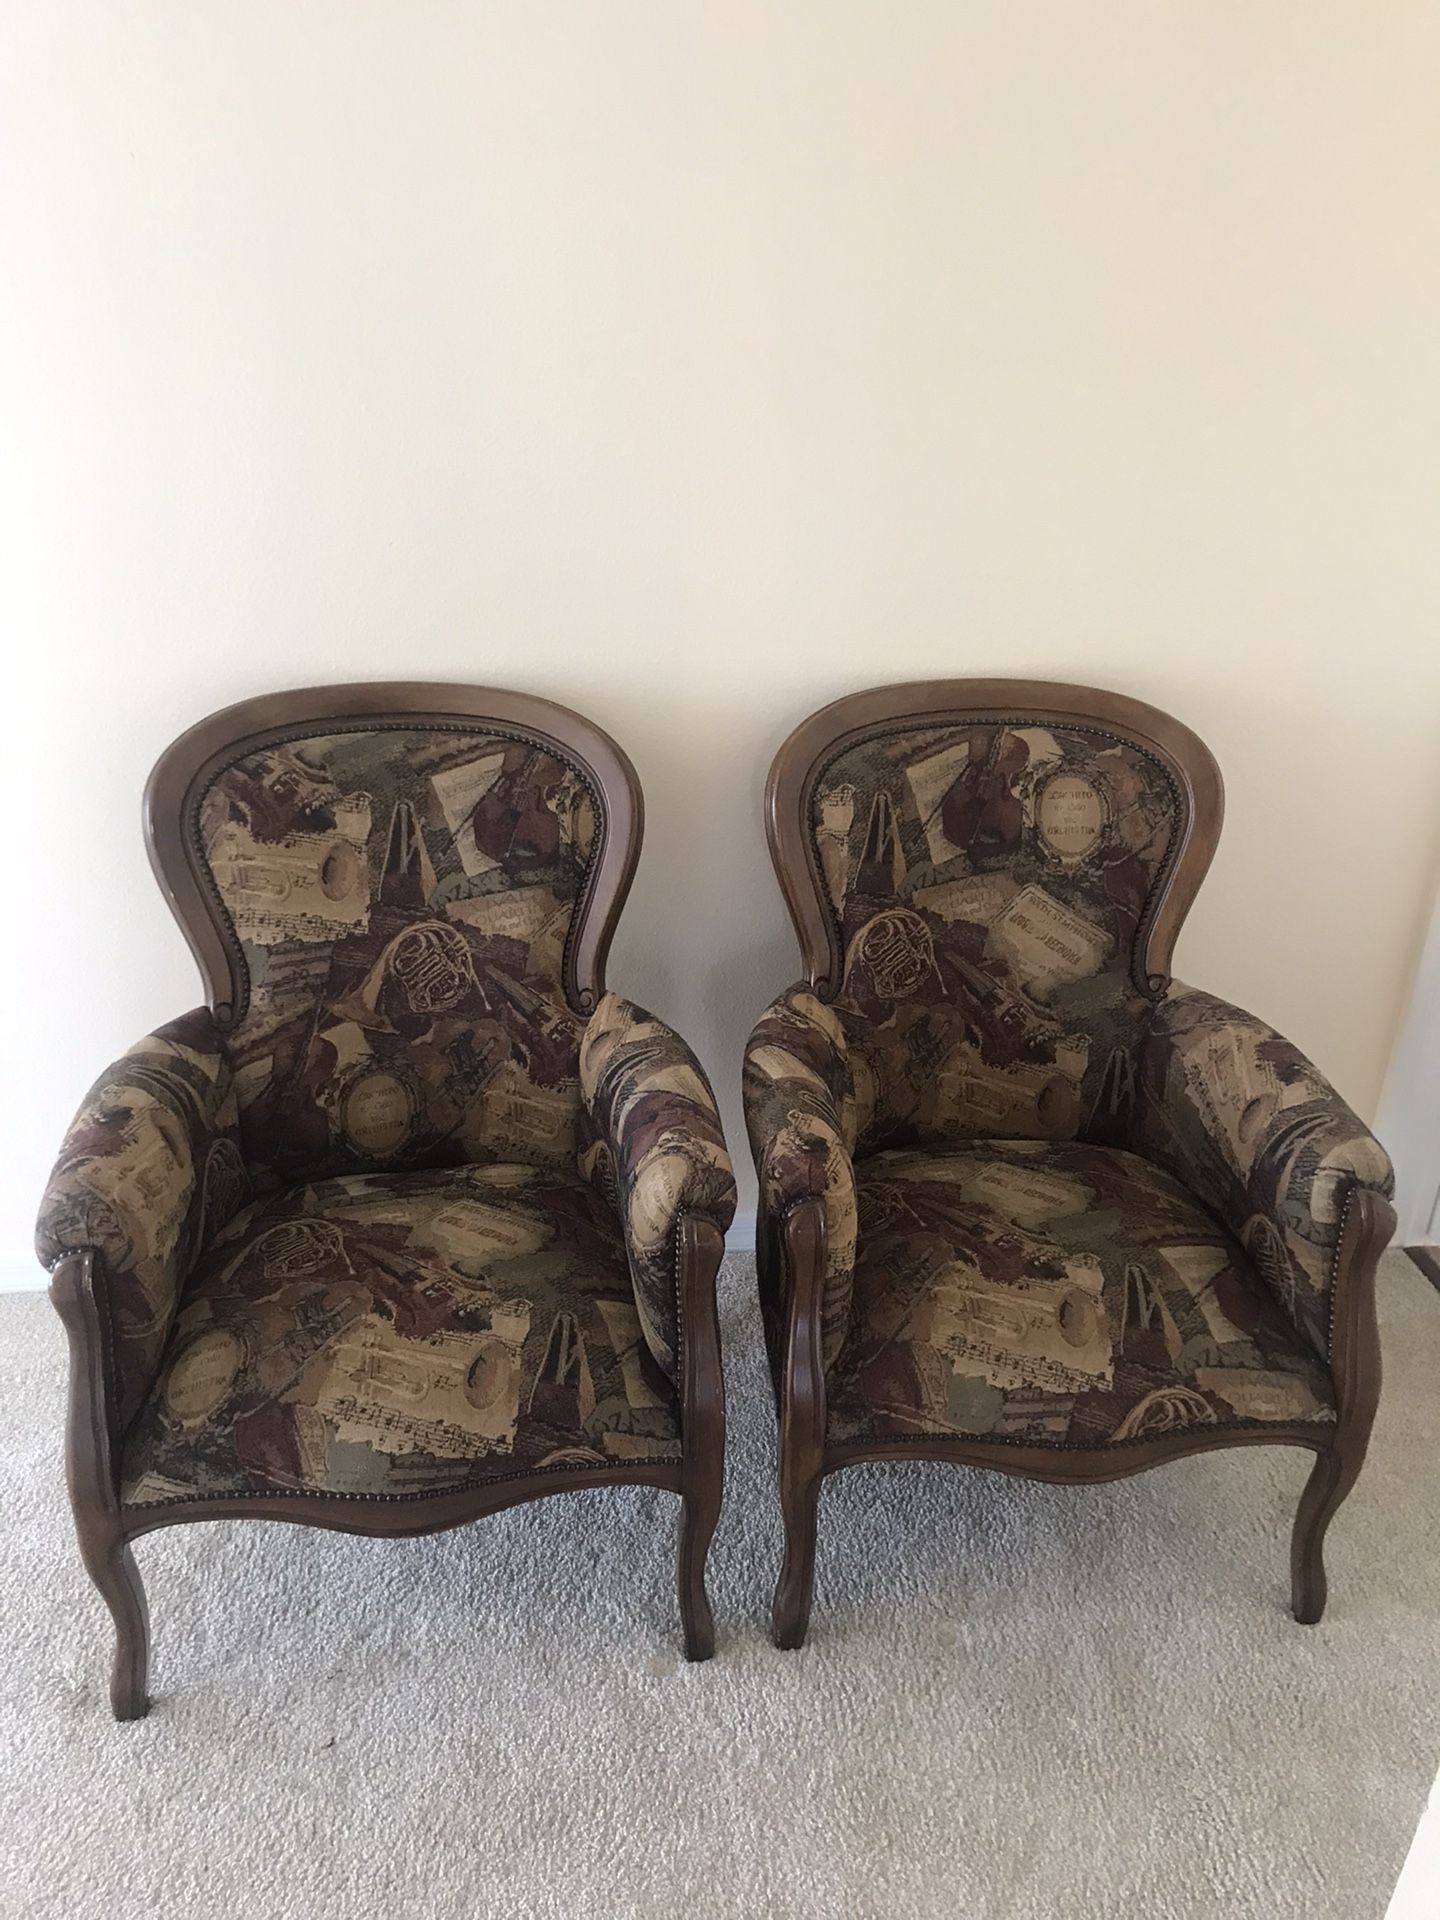 Beautiful Arm Chairs For Sale! Free Delivery 🚚 